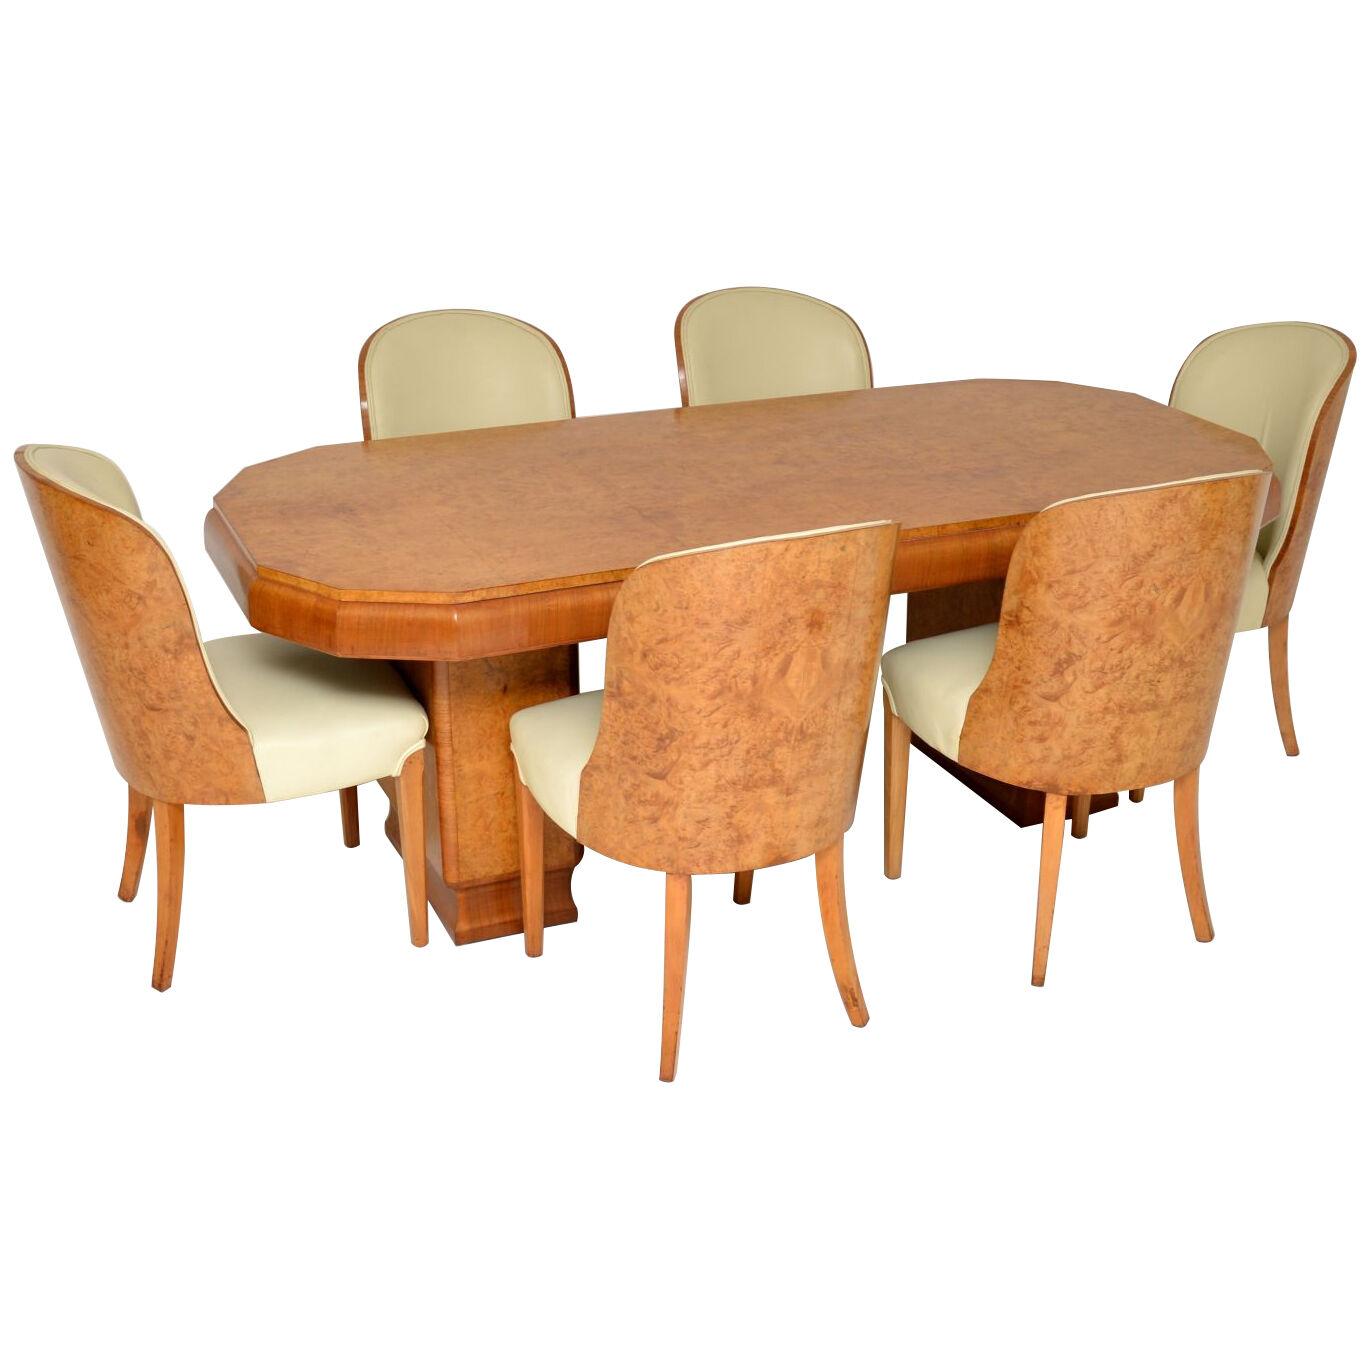 Art Deco Burr Walnut Dining Table & Cloud Back Chairs by Epstein